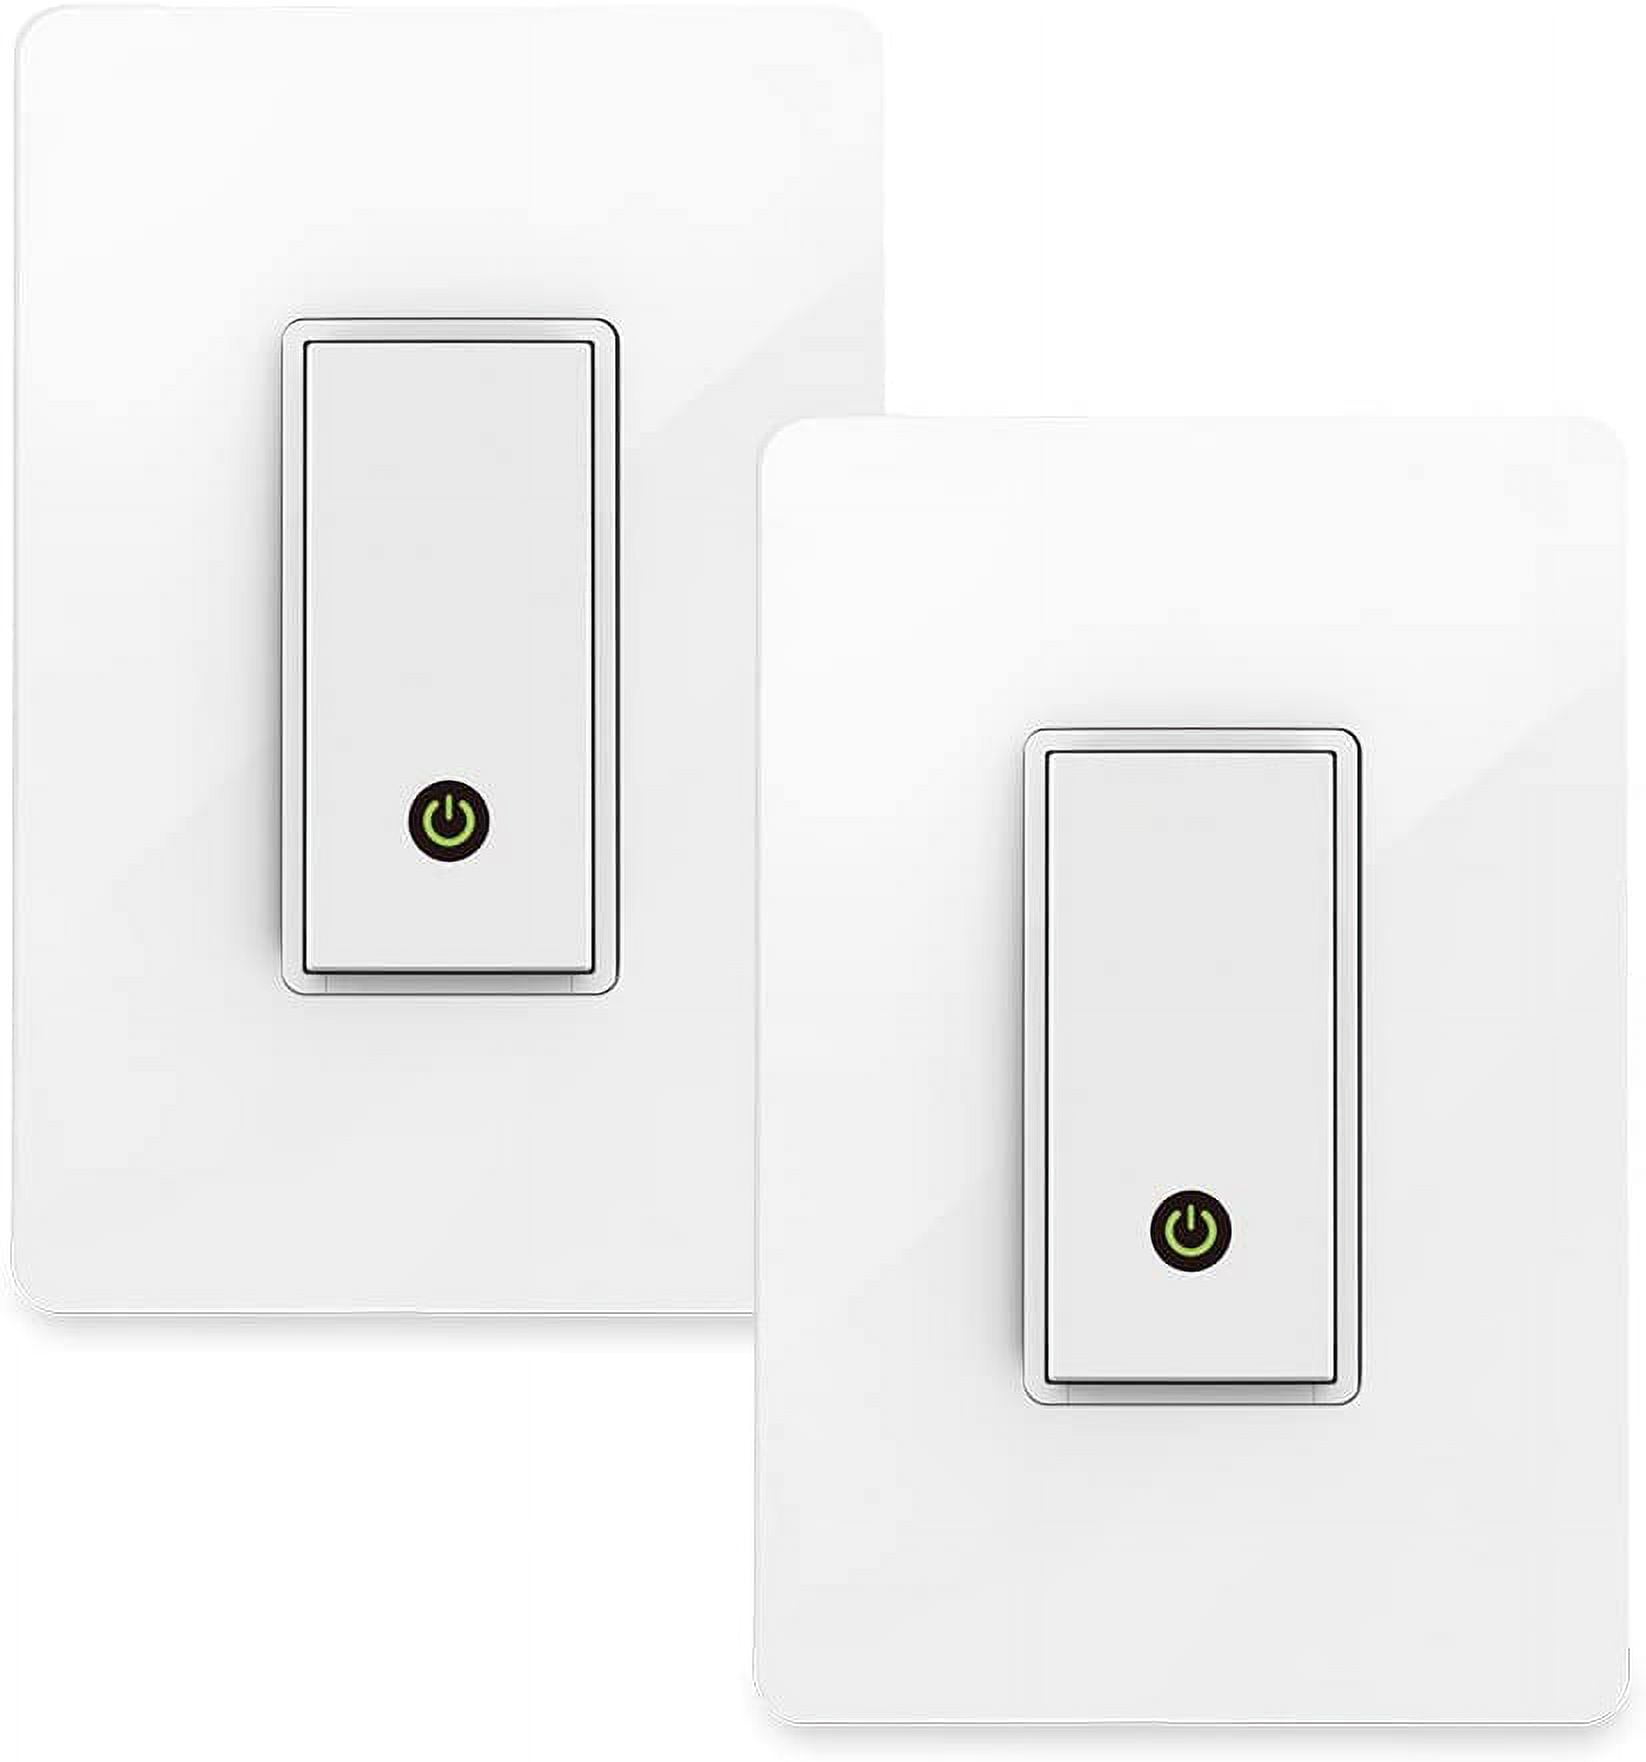  Wemo F7C030fc Light Switch, WiFi enabled, Works with